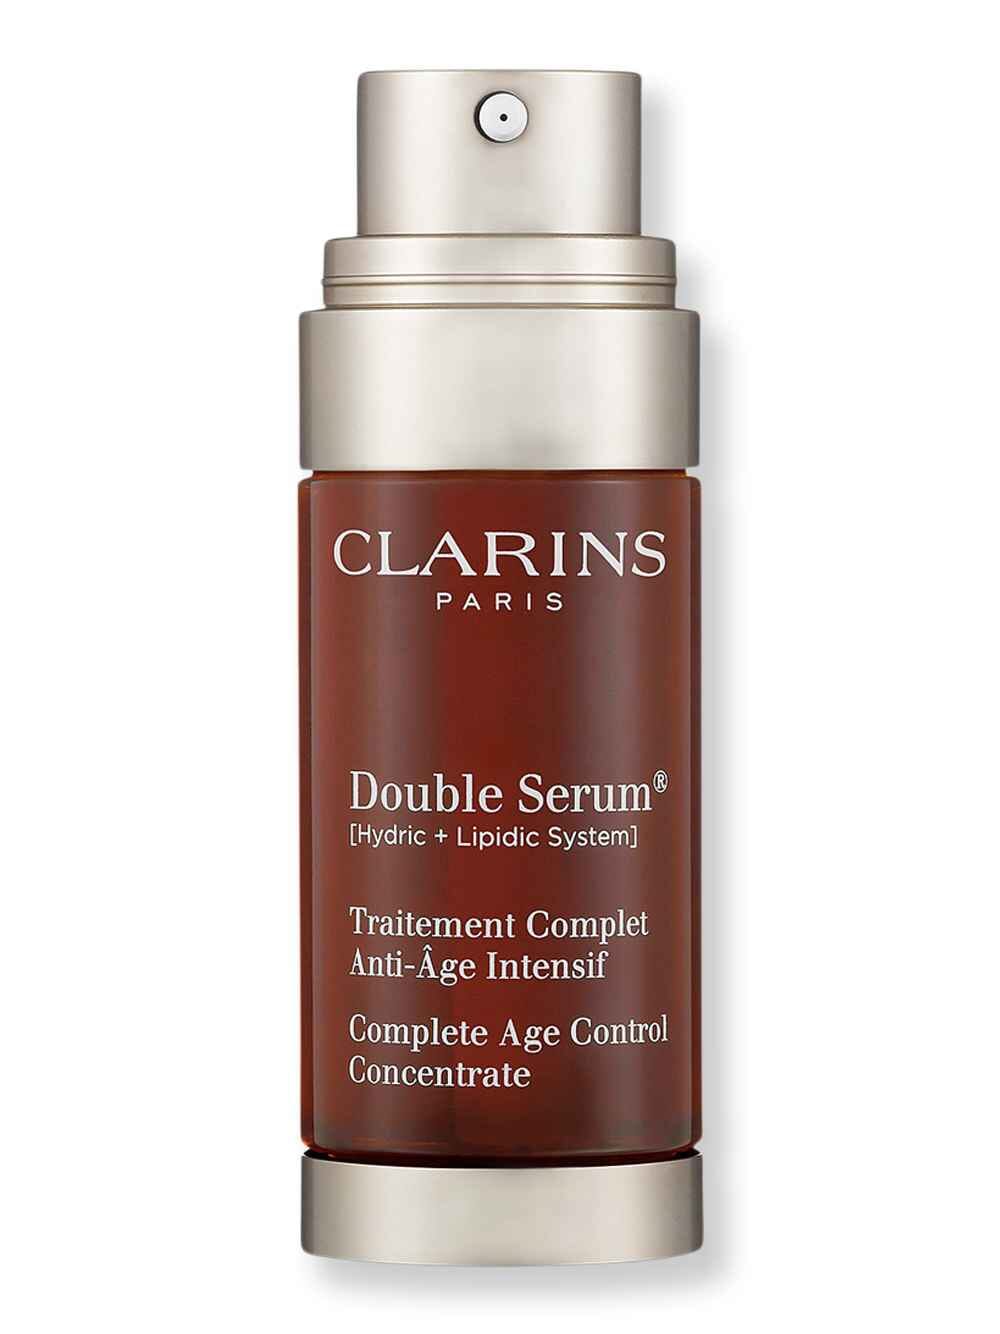 Clarins Clarins Double Serum Firming & Smoothing Anti-Aging Concentrate 1 oz30 ml Serums 